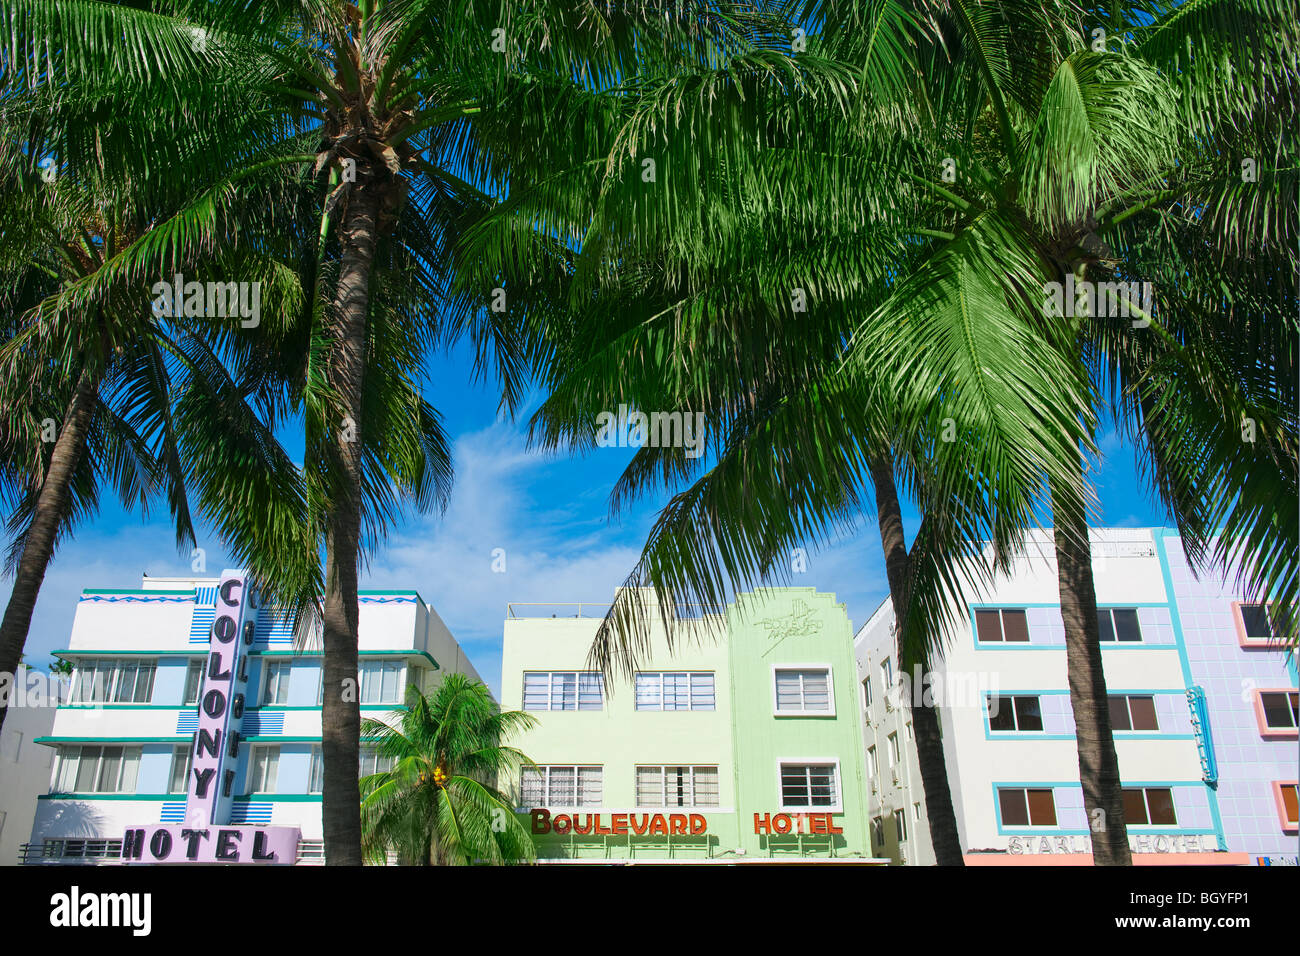 Palm trees and art deco buildings Stock Photo